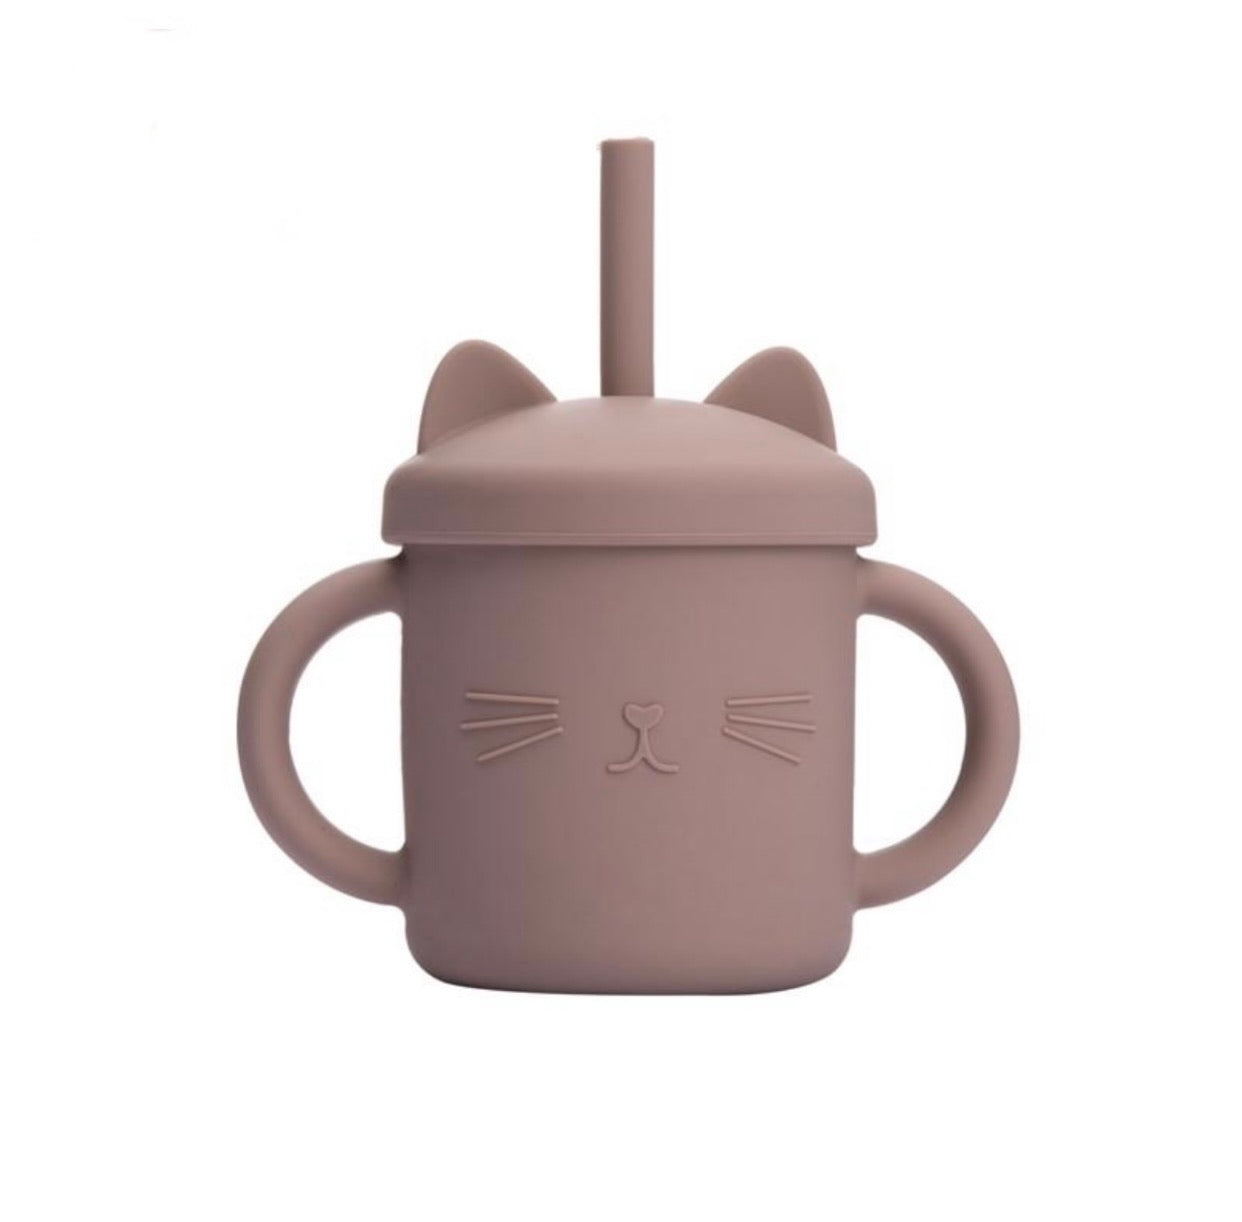 The Kitty Cup